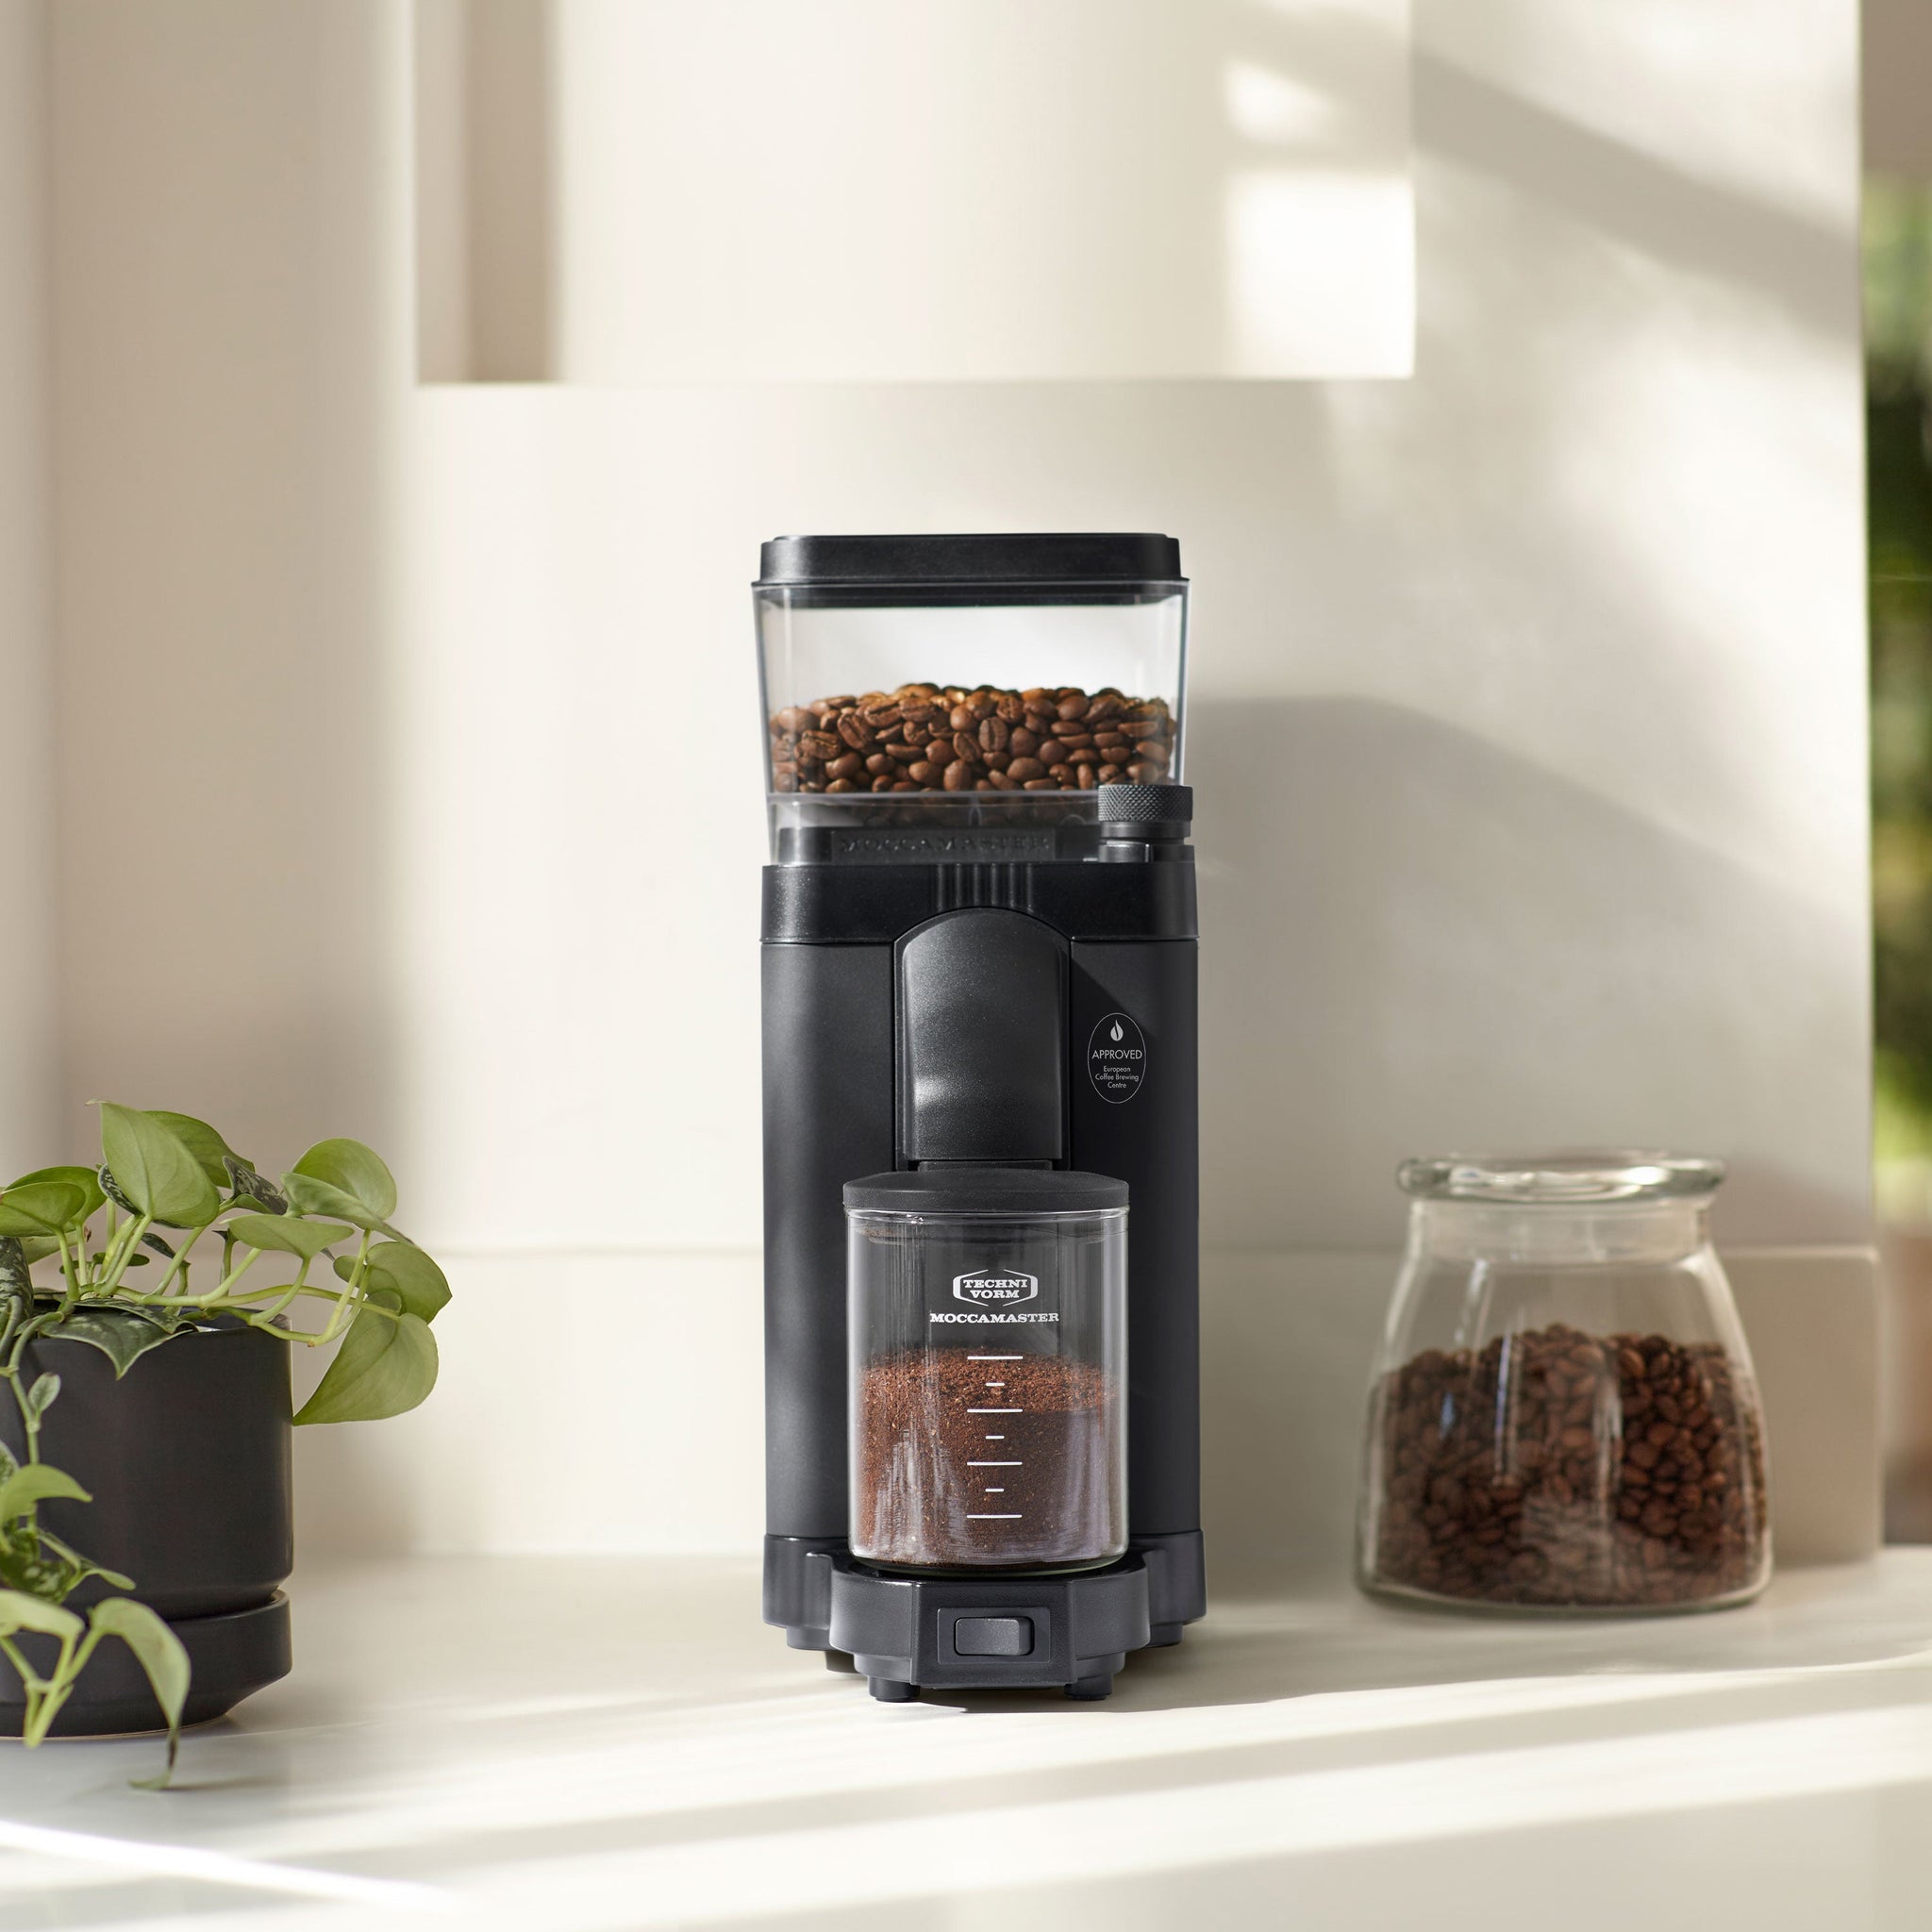 The Best Home Coffee Grinder - Techlicious